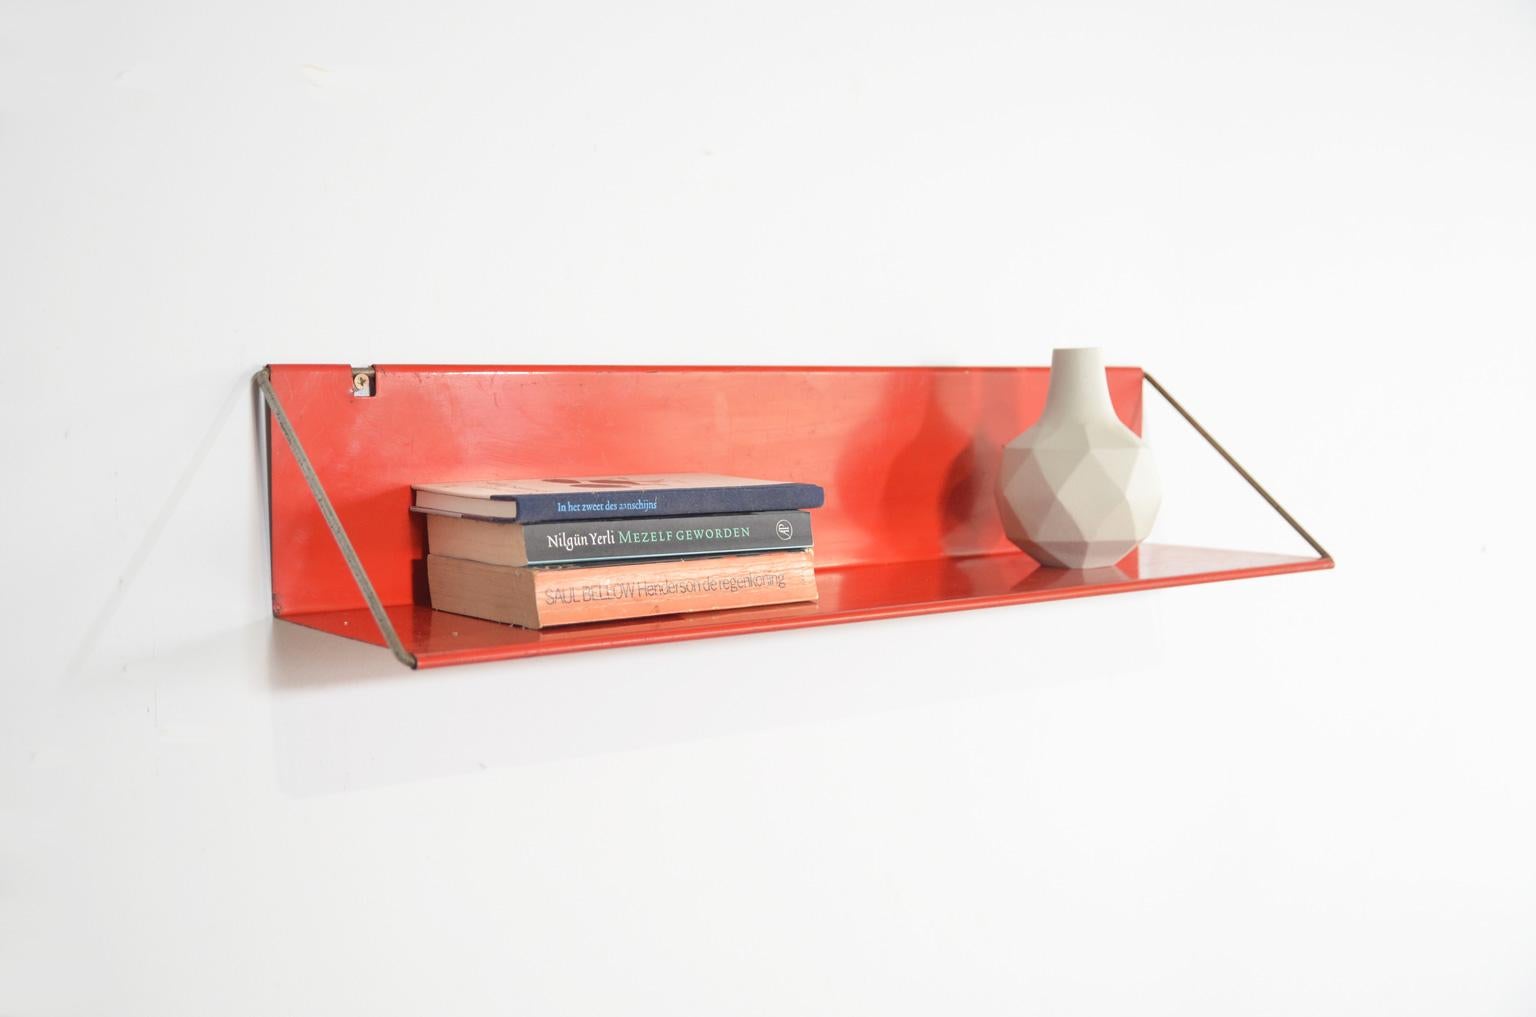 Constant Nieuwenhuys, the Dutch artist, musician, writer and co-founder of the Cobra art movement has also designed some items for the Dutch furniture company 't Spectrum. One of these was this red metal shelf, model 'Utrecht'.